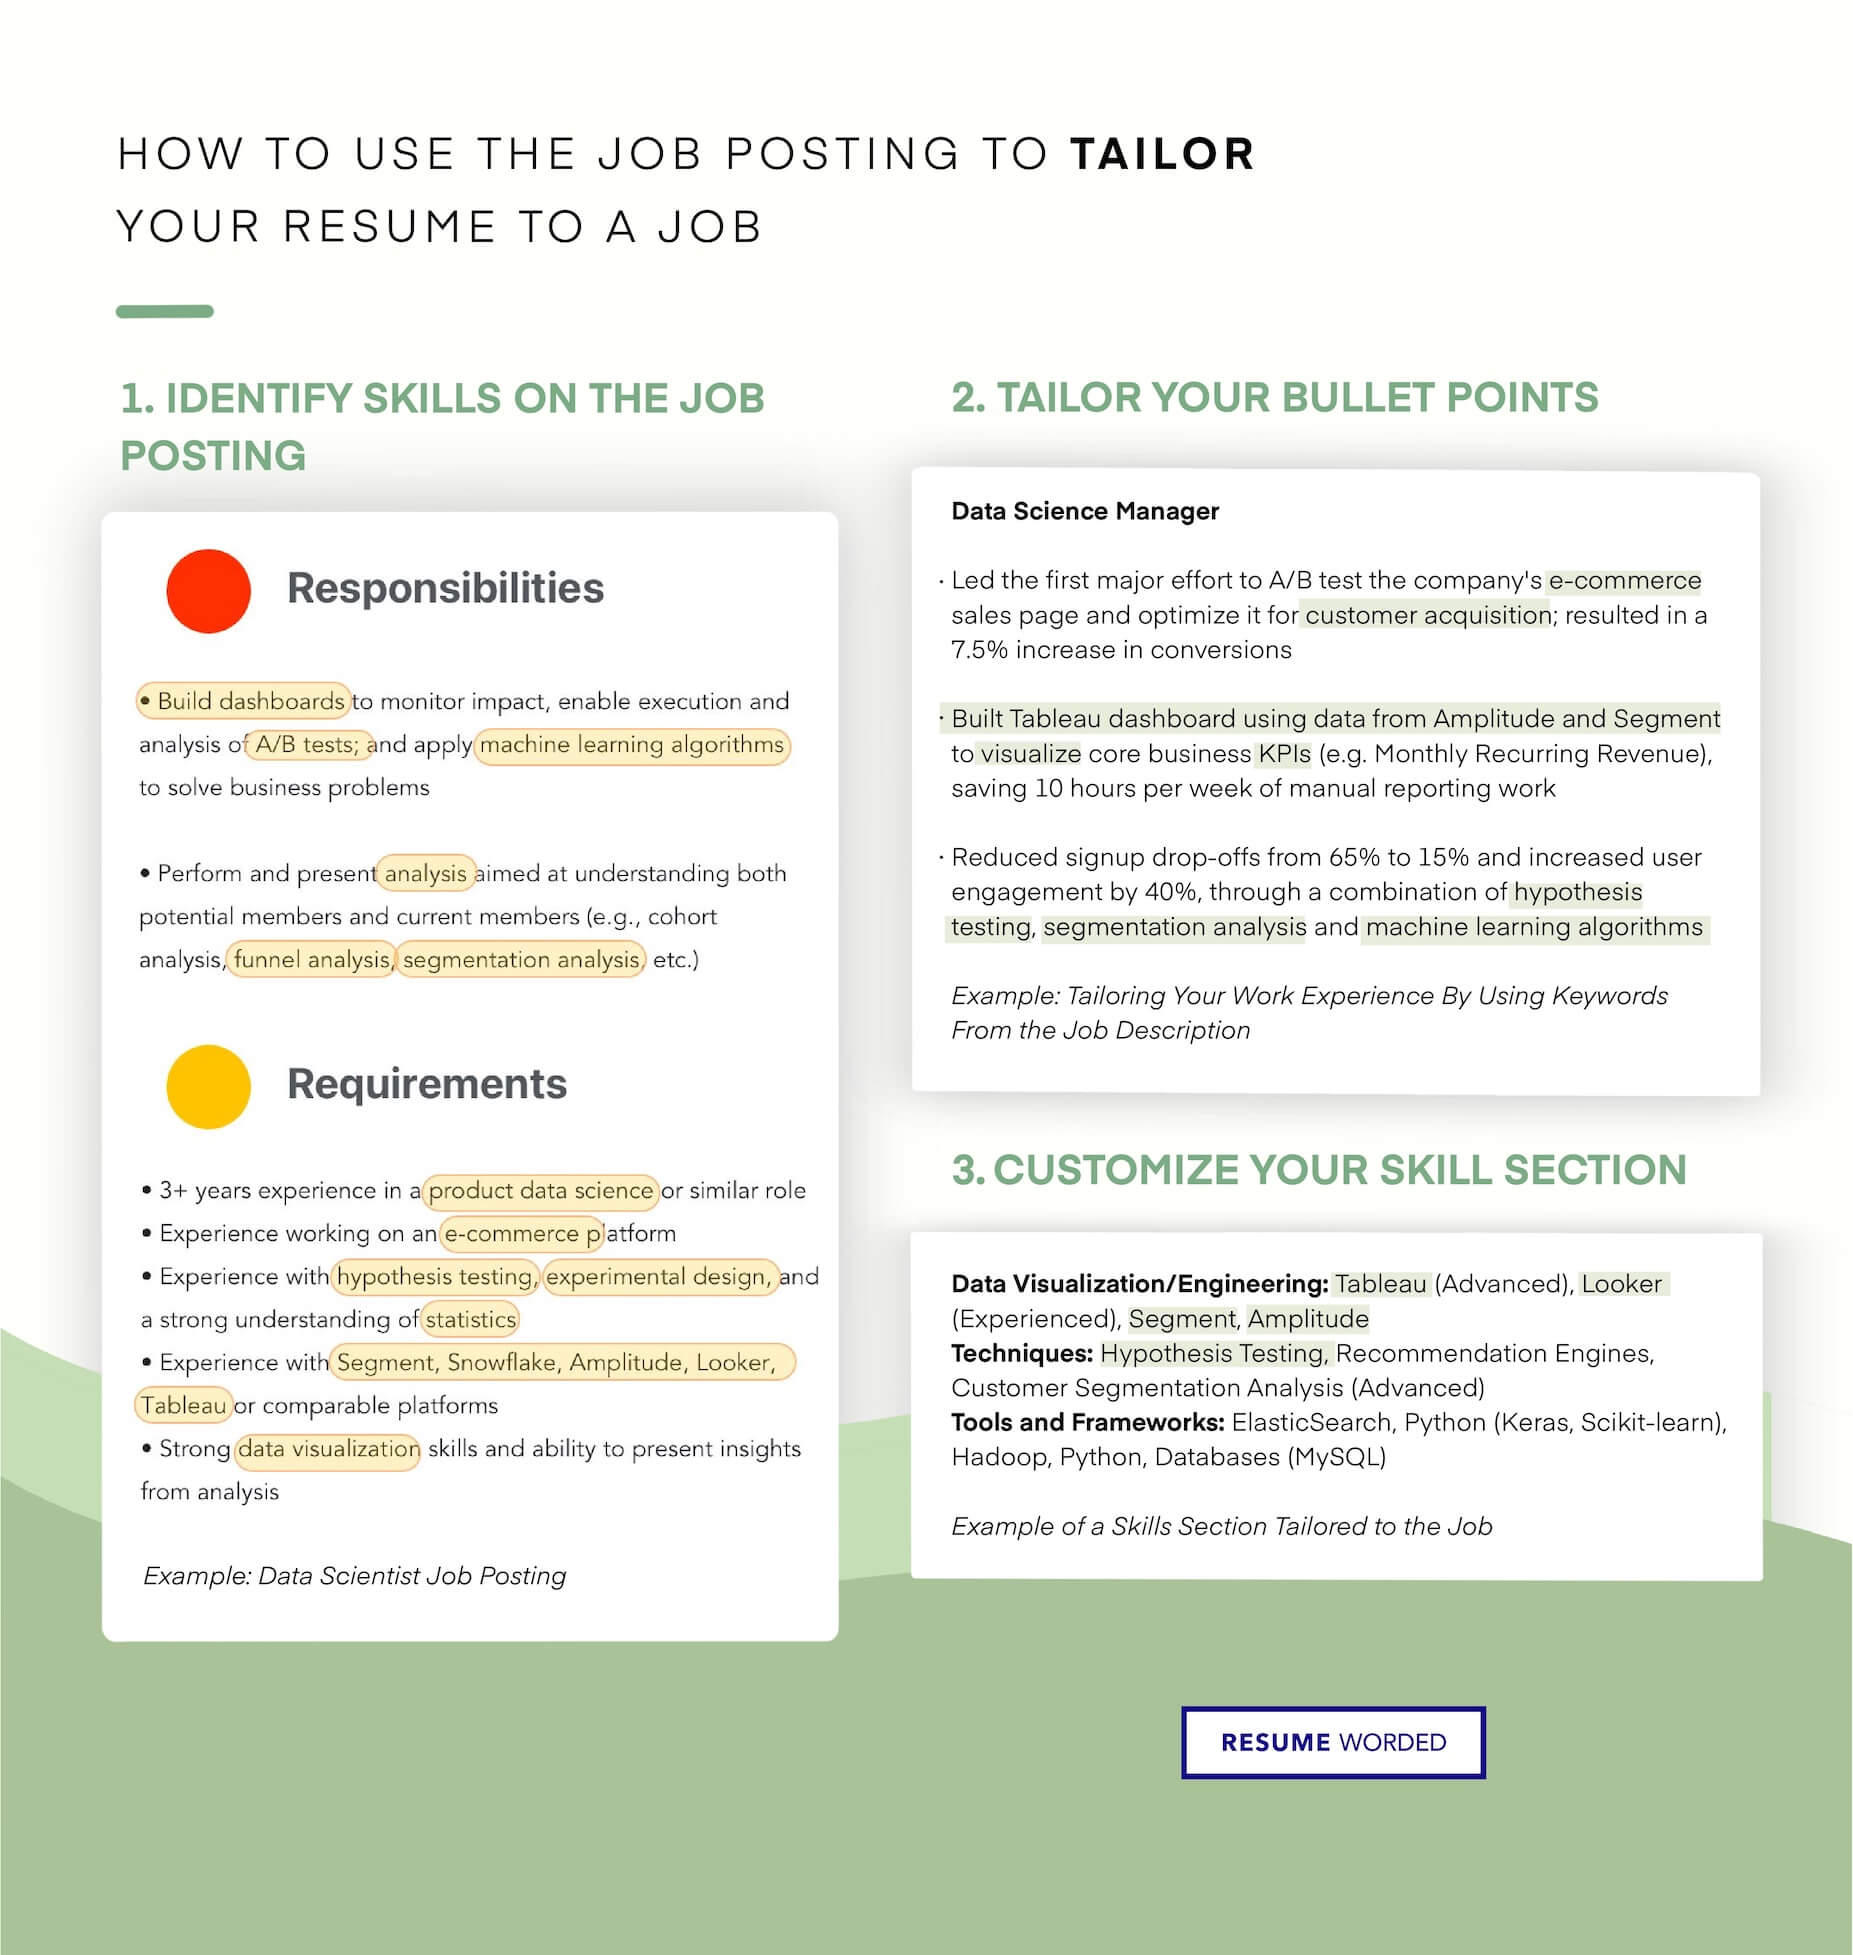 Target your resume to the job - Marketing Data Analyst Resume